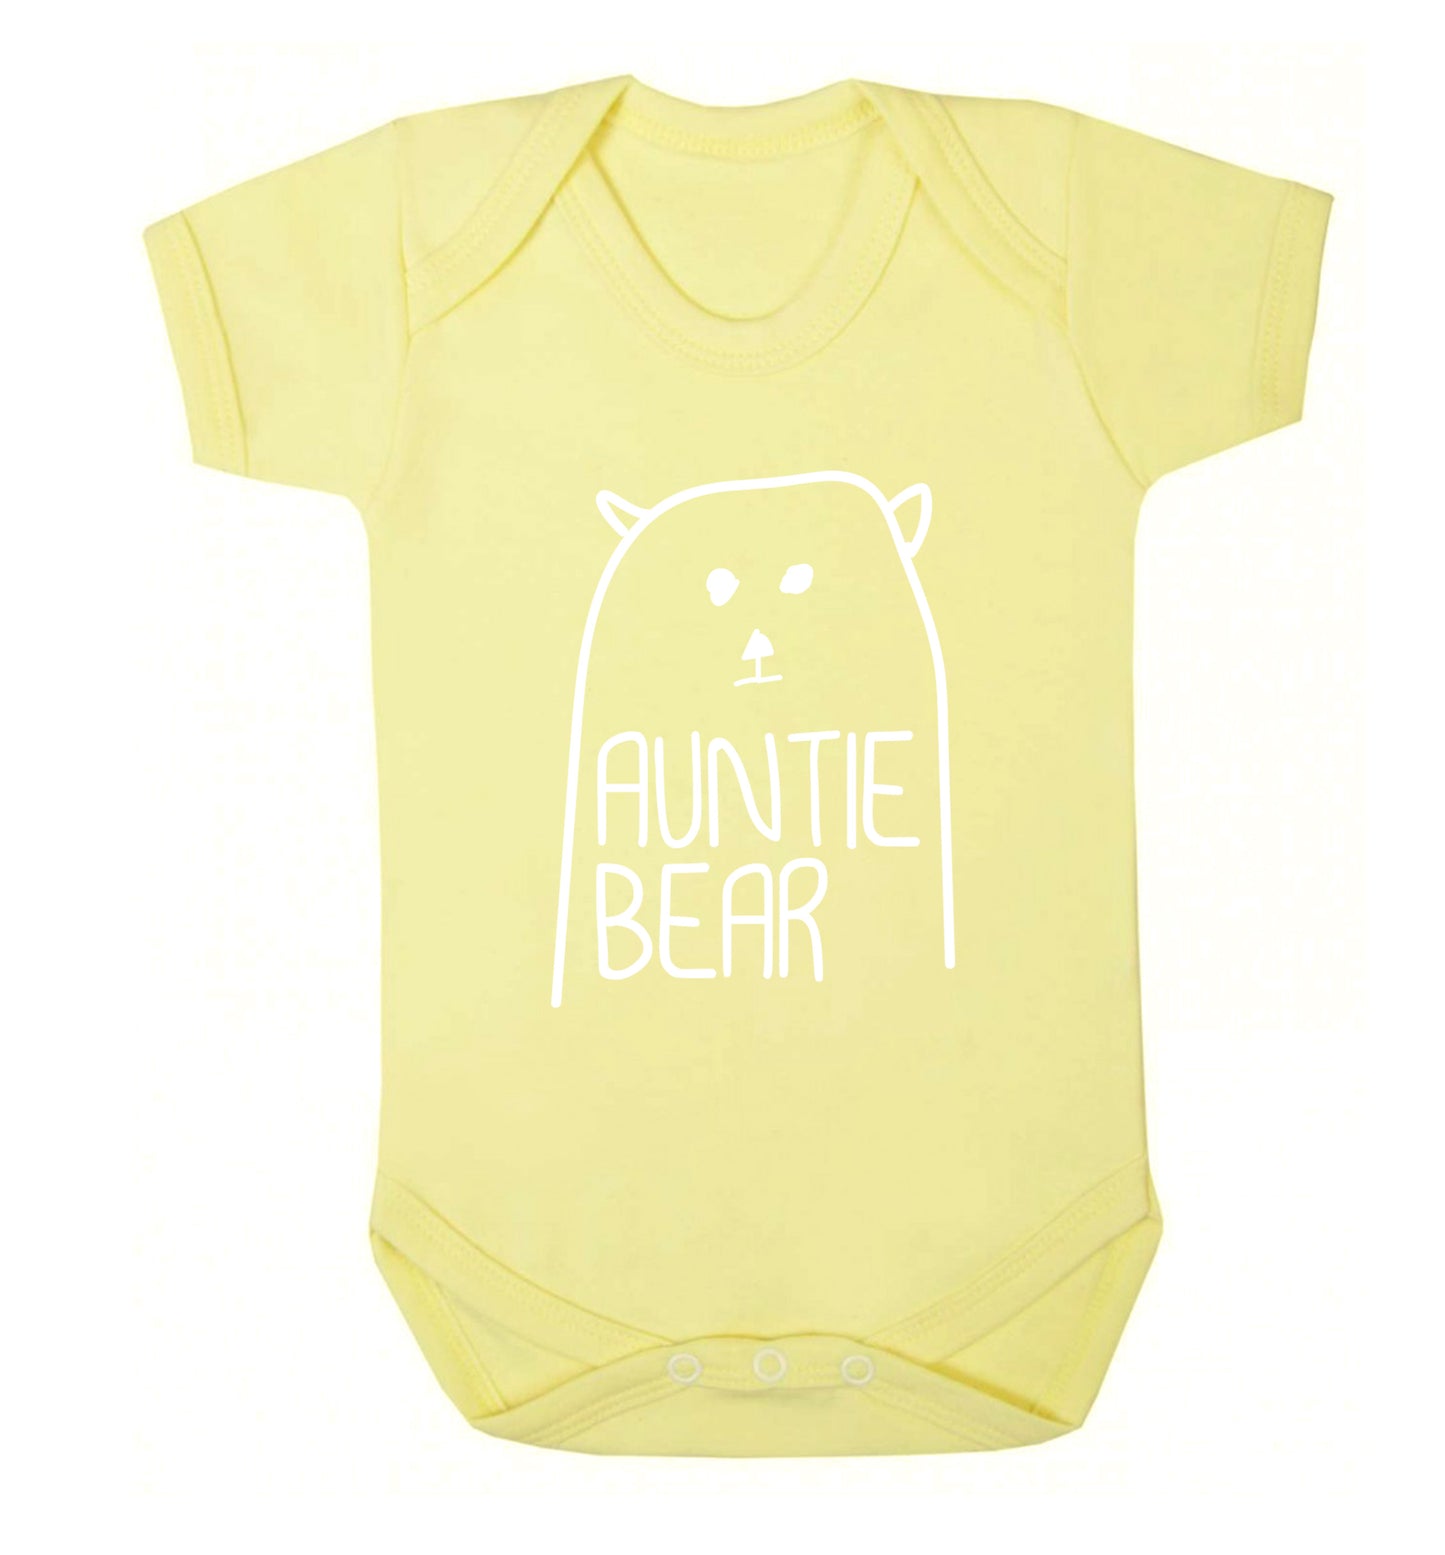 Auntie bear Baby Vest pale yellow 18-24 months